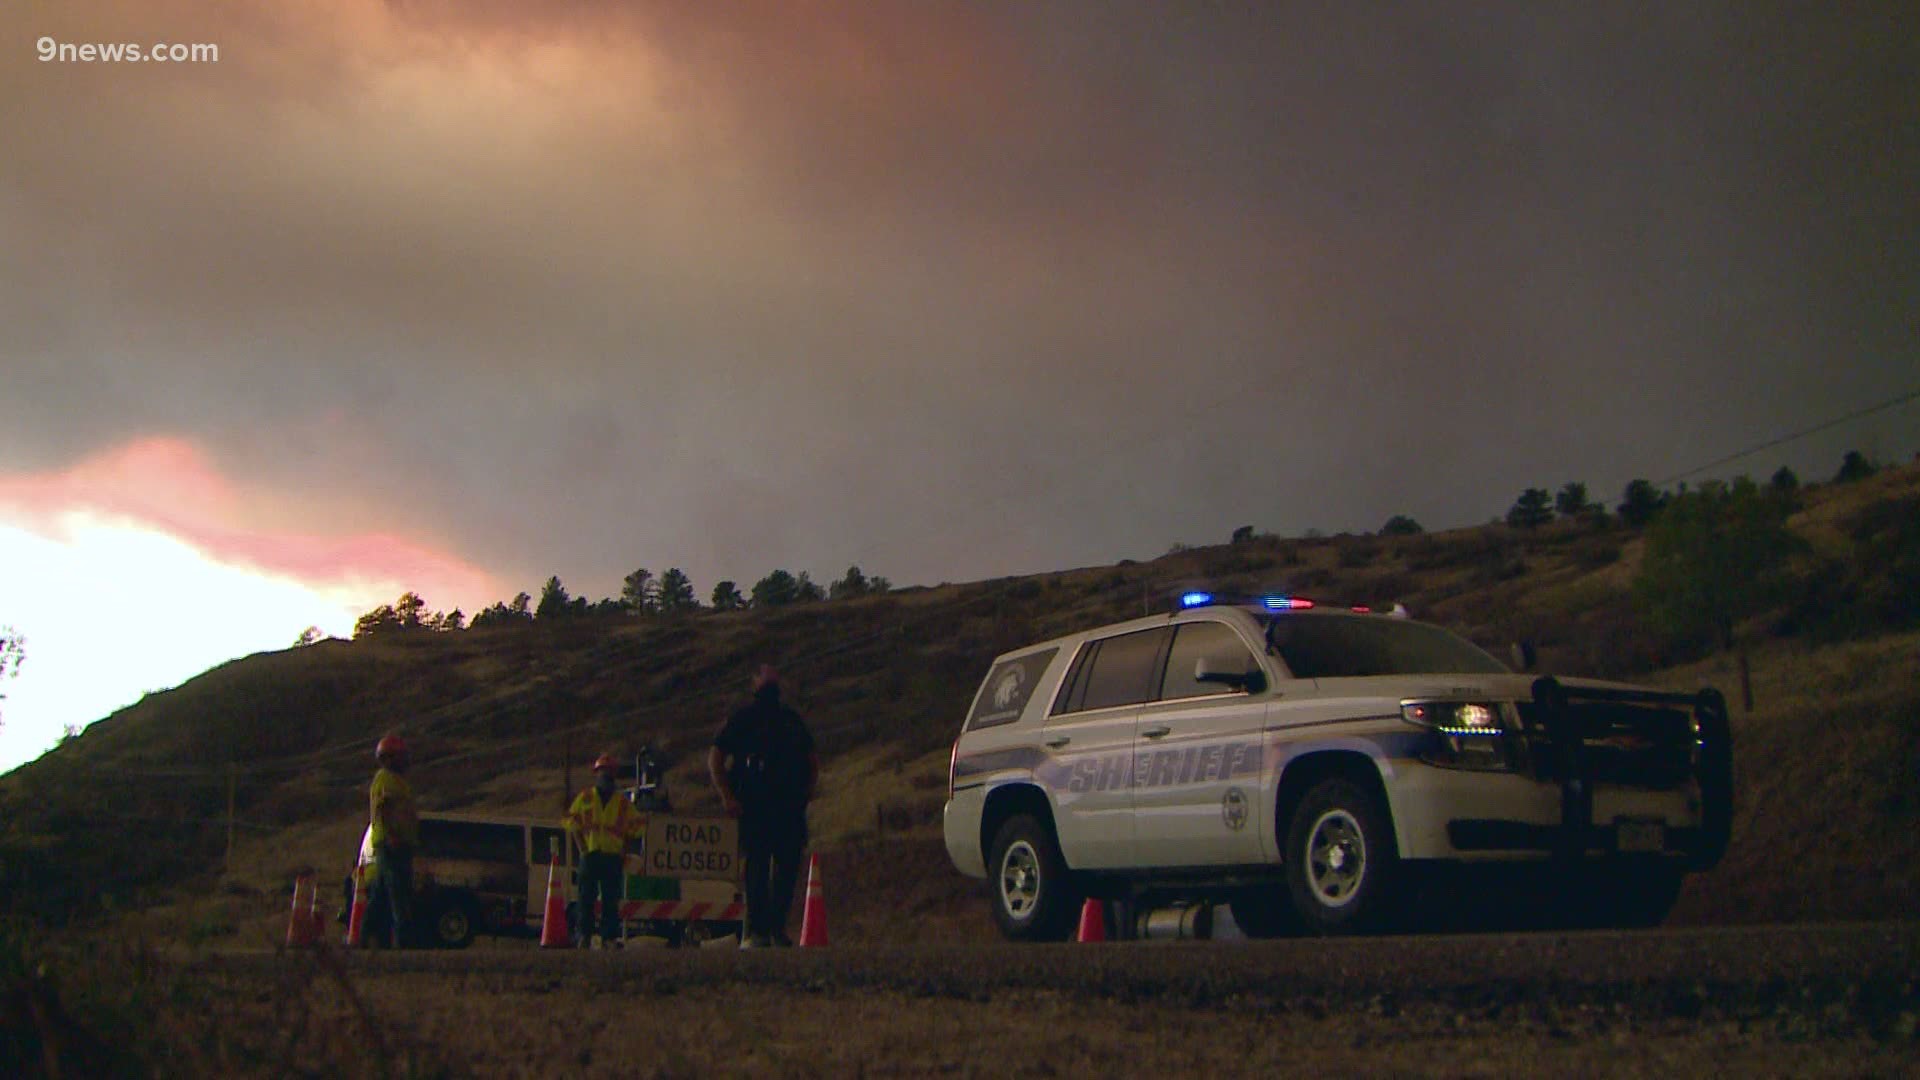 The wildfire that started Saturday in Boulder County has burned 9,978 acres and is 21% contained.